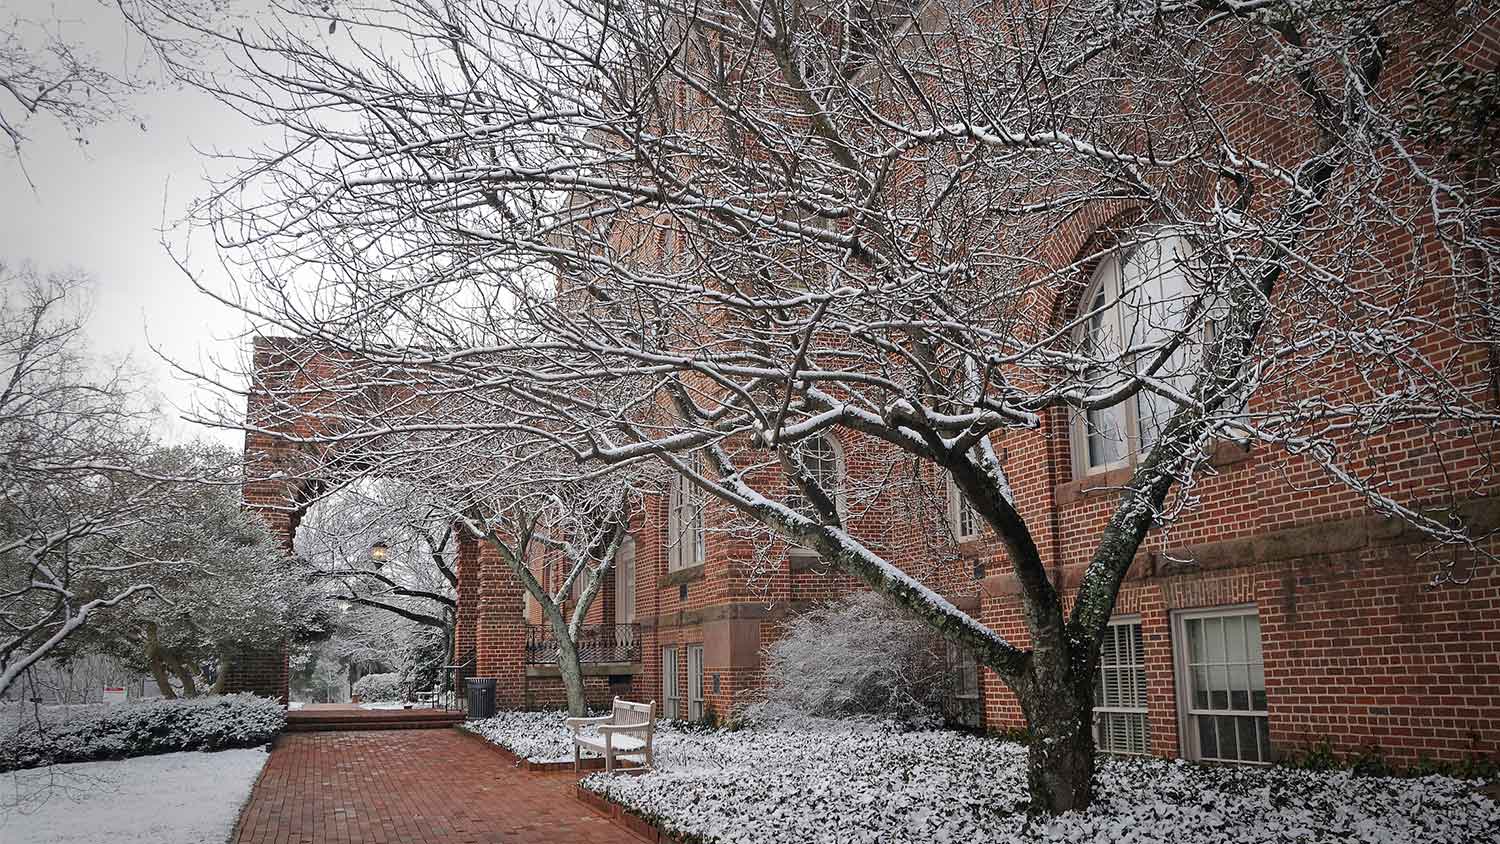 Winter scene on Main Campus with snow on trees and ground but cleared brick path